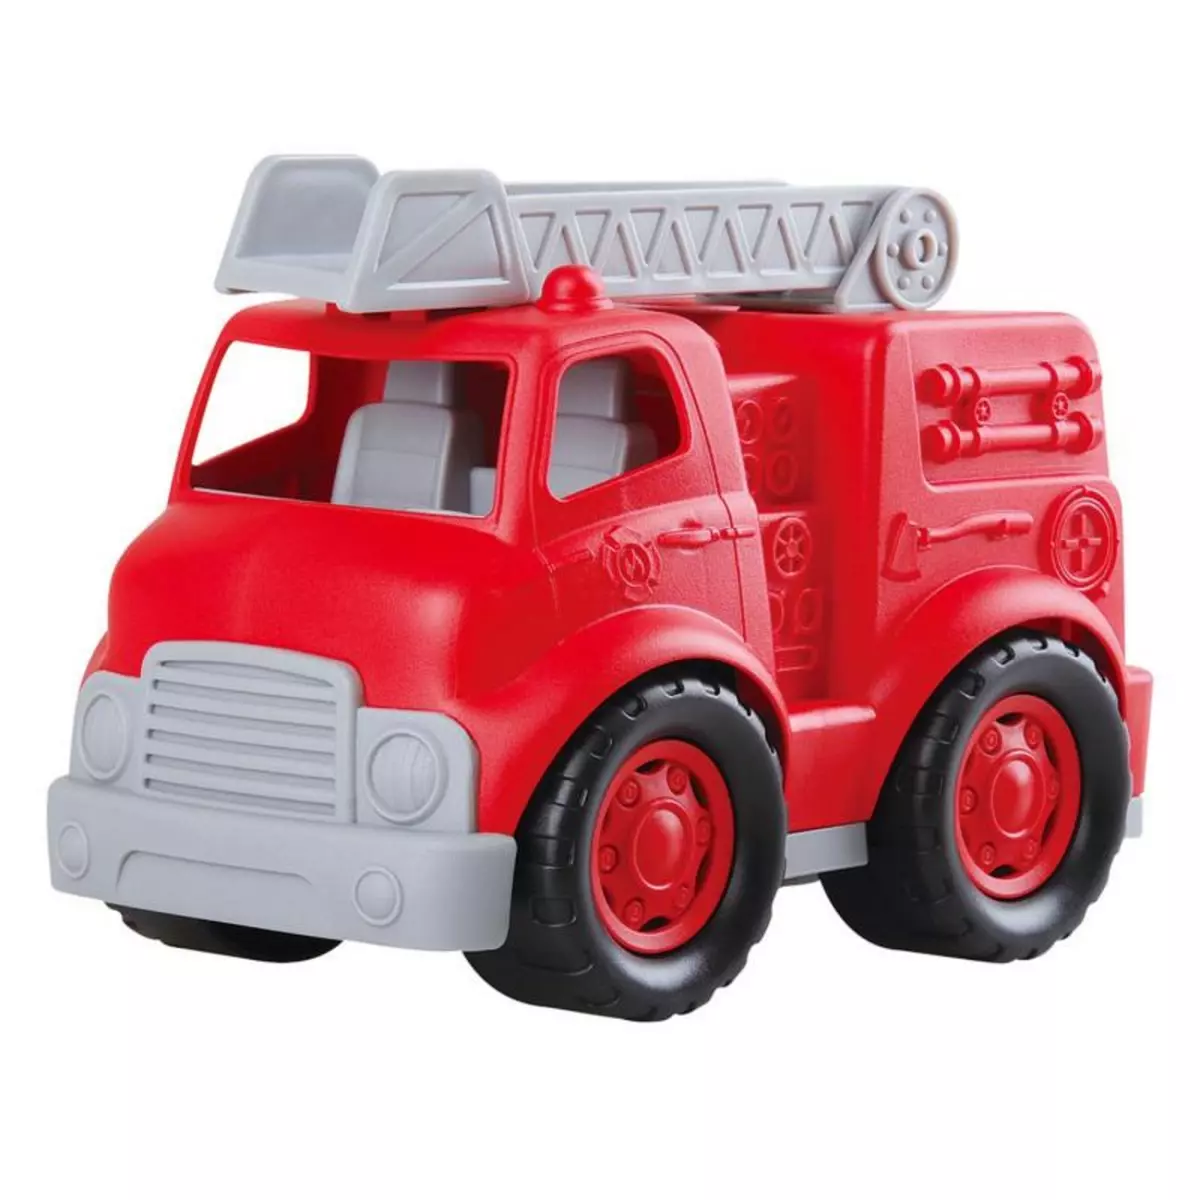 PLAYGO Playgo Fire Truck